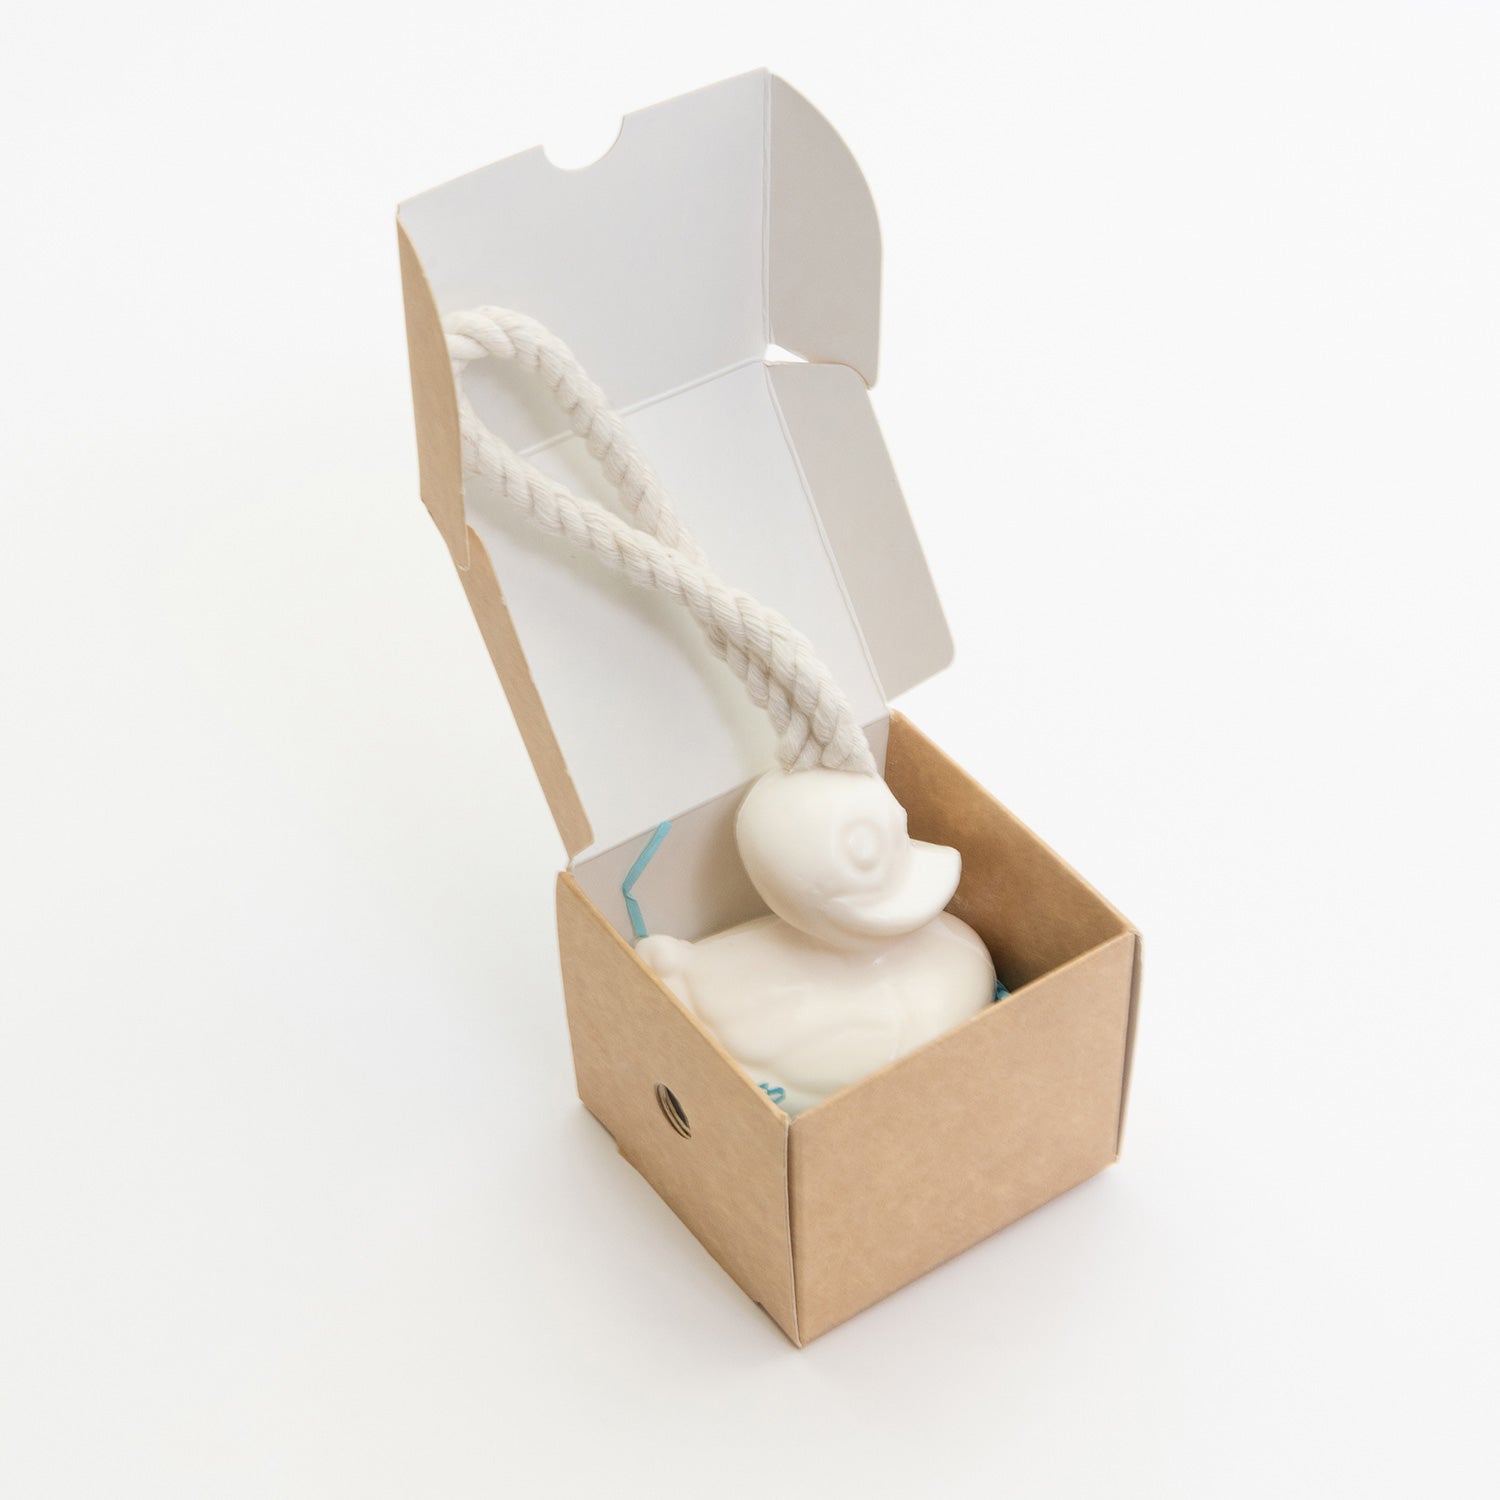 A white duck-shaped soap on a rope in a cardboard gift box. The duck is placed on shredded blue tissue paper in the box. 